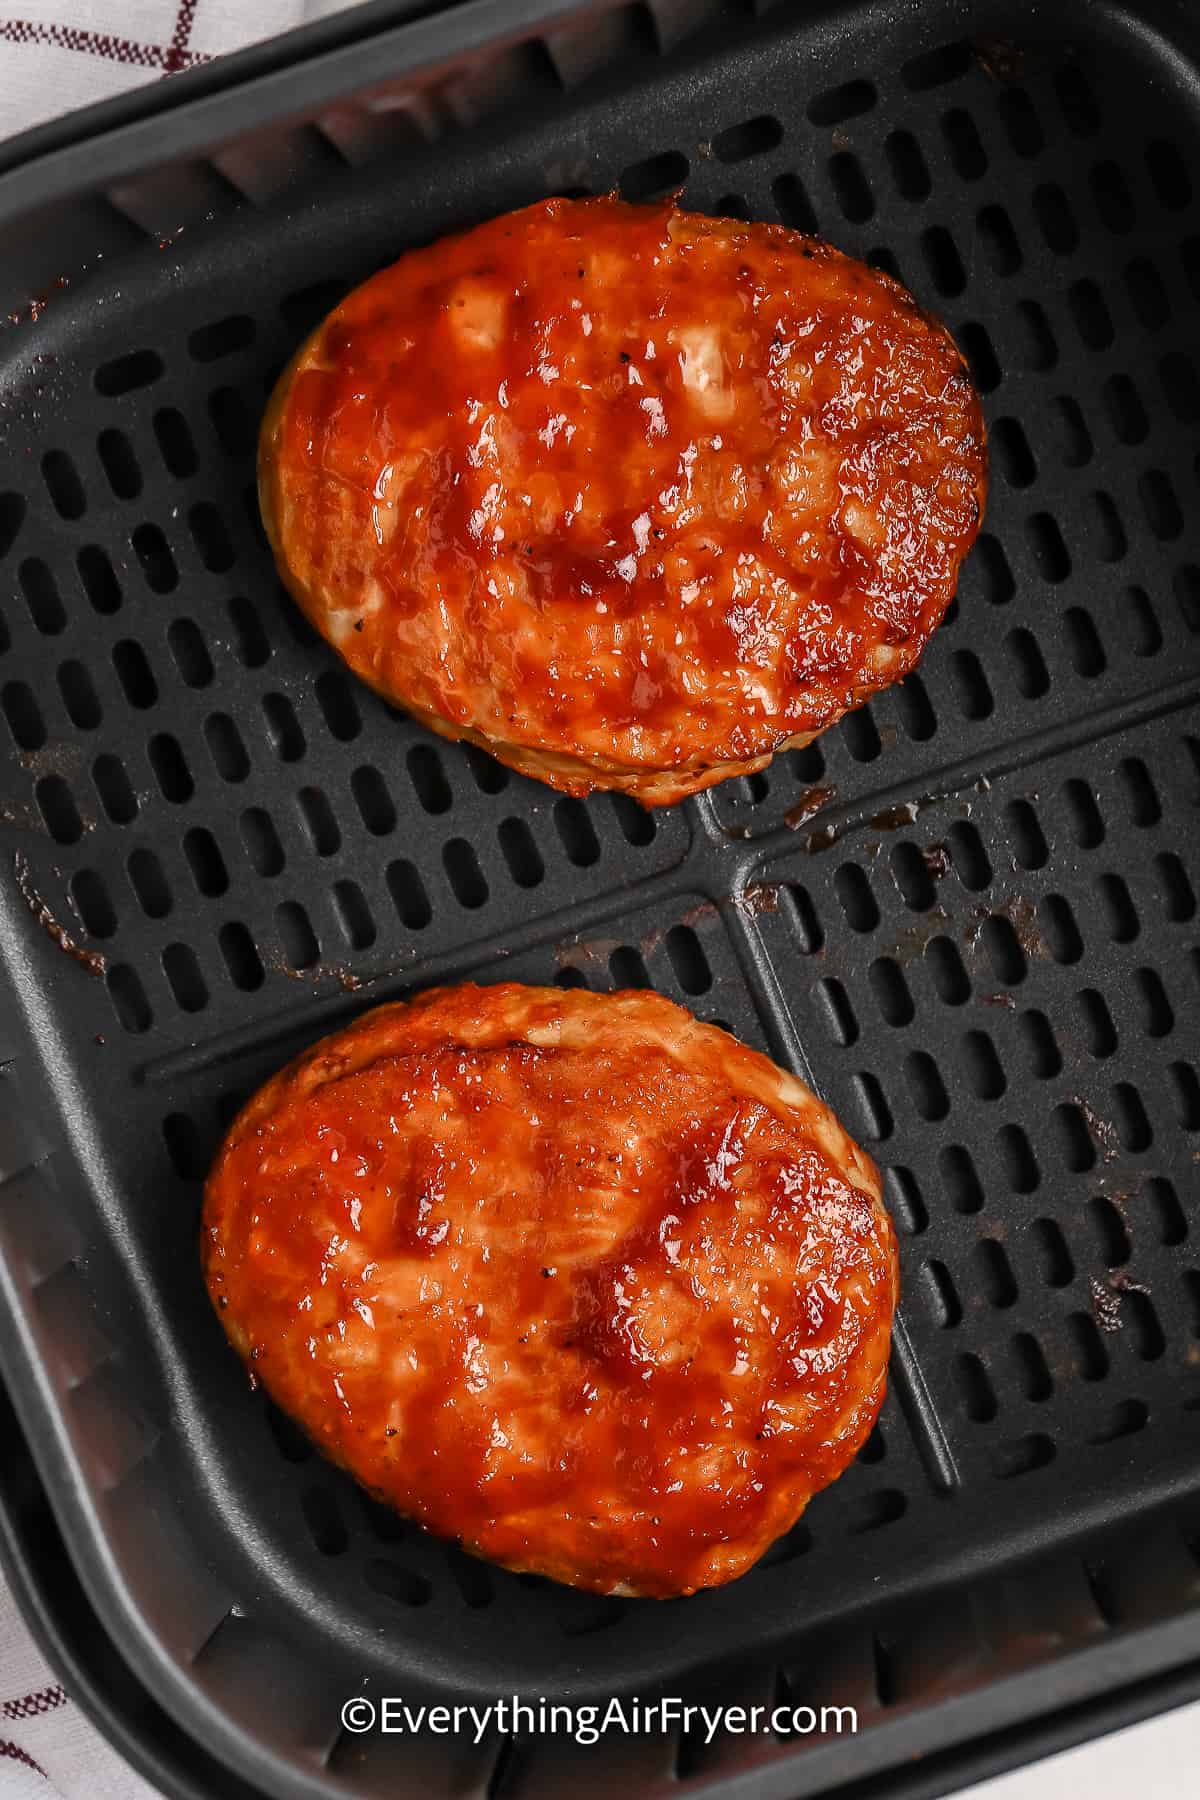 Turkey burgers topped with bbq sauce in an air fryer basket